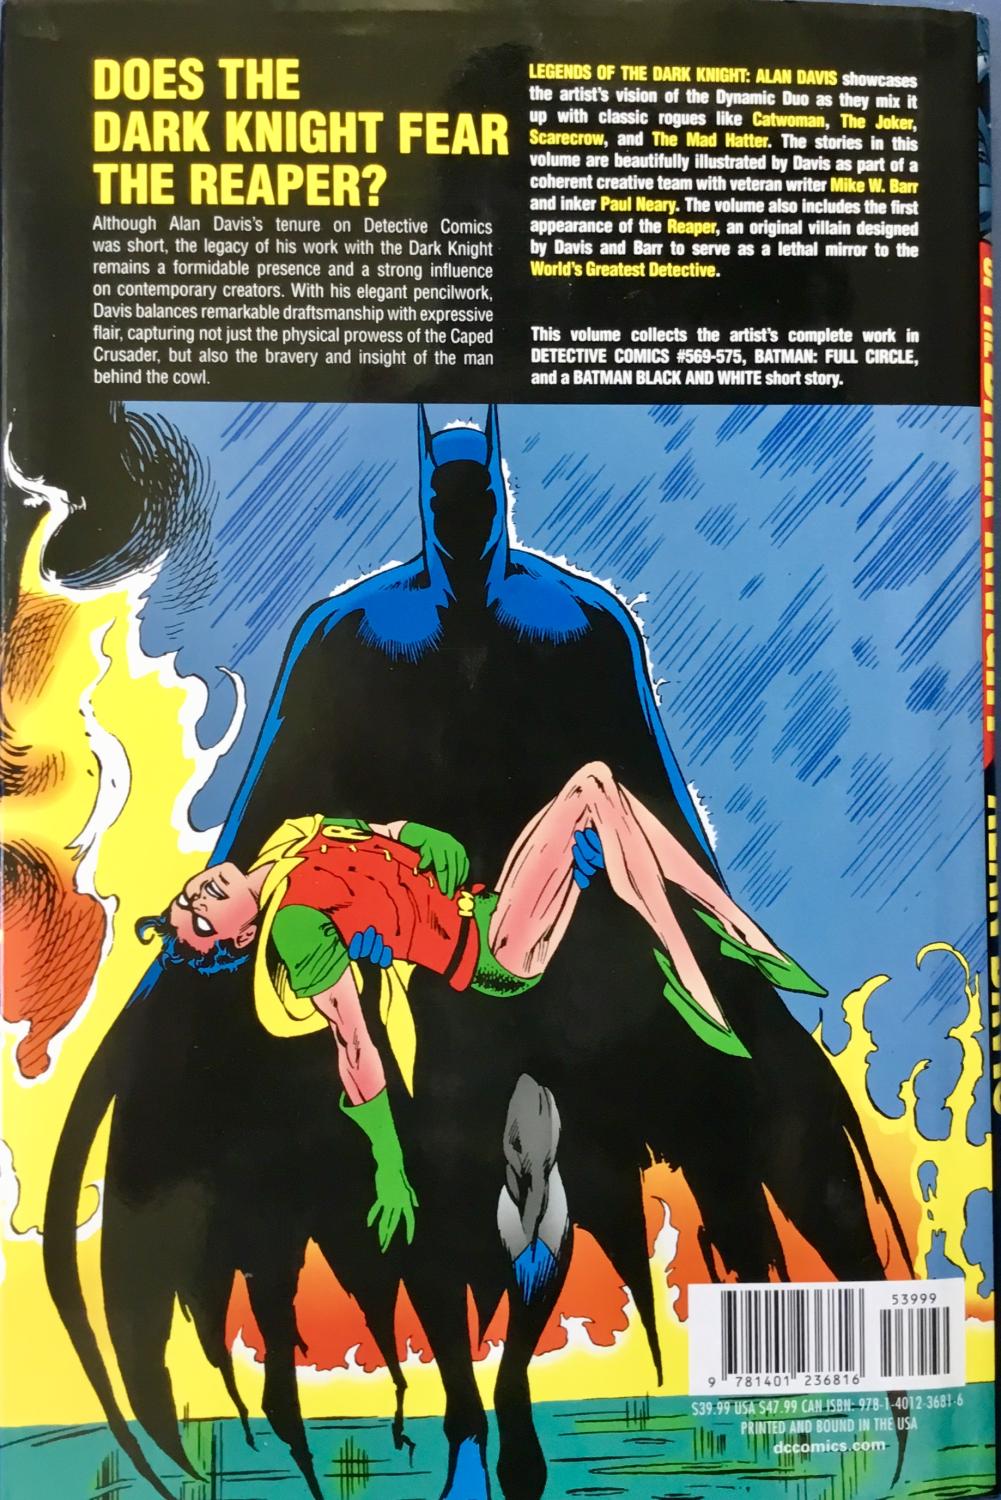 LEGENDS of the DARK KNIGHT : ALAN DAVIS Volume One (1) by BARR, MIKE W.:  (2012) 1st Edition Comic | OUTSIDER ENTERPRISES